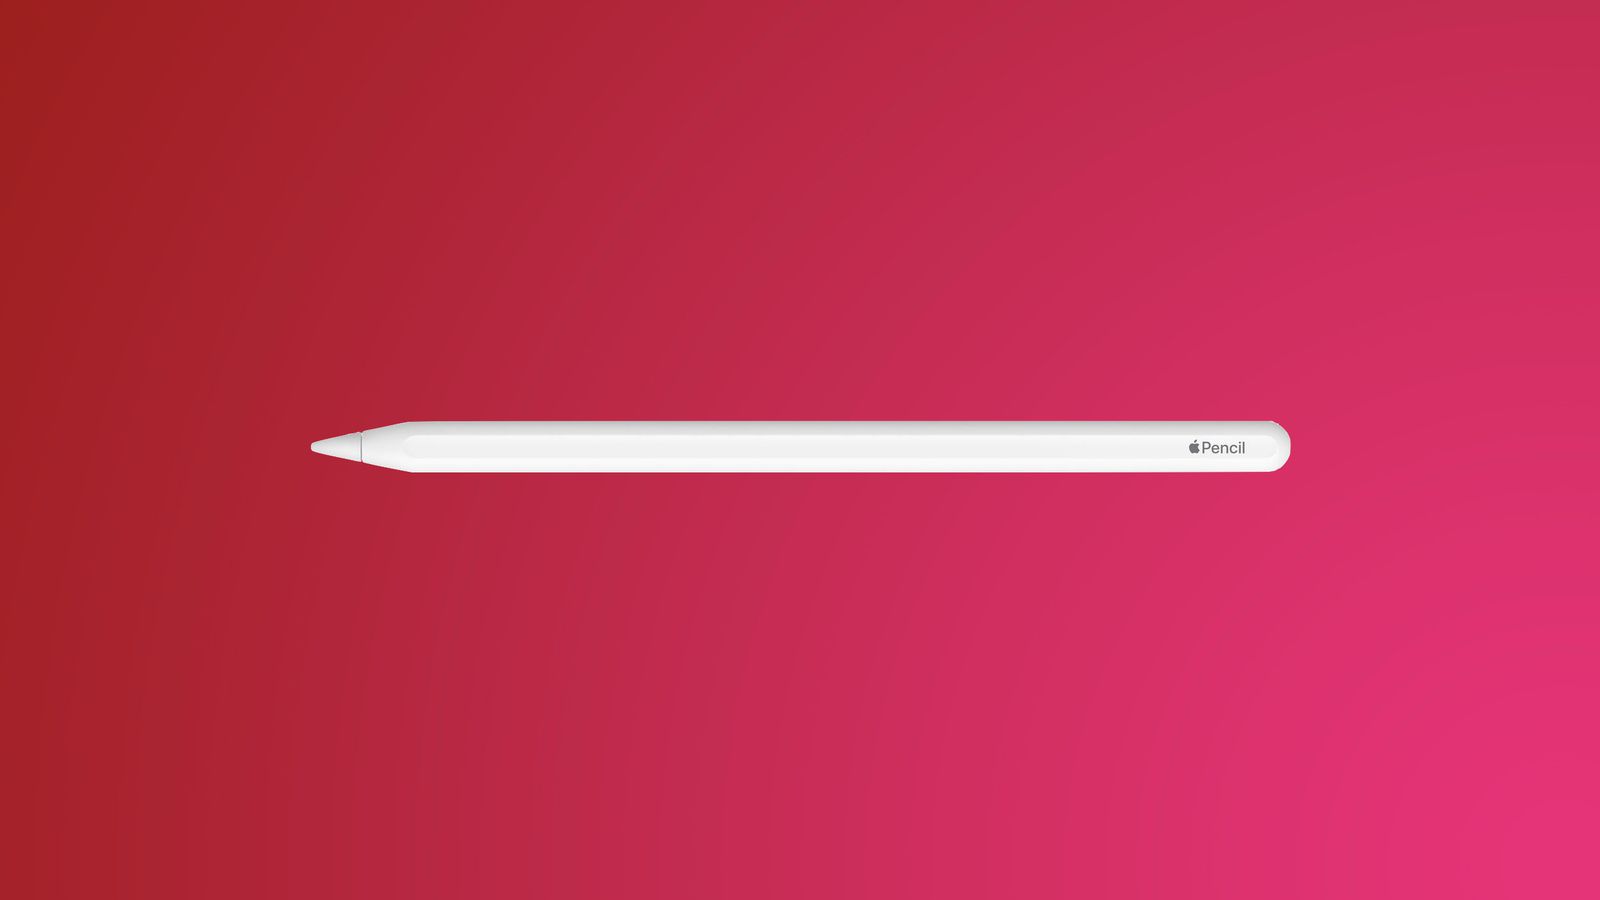 Rumor: Apple had planned to show a budget Apple Pencil at the iPhone 14 presentation, but canceled the project at the last minute